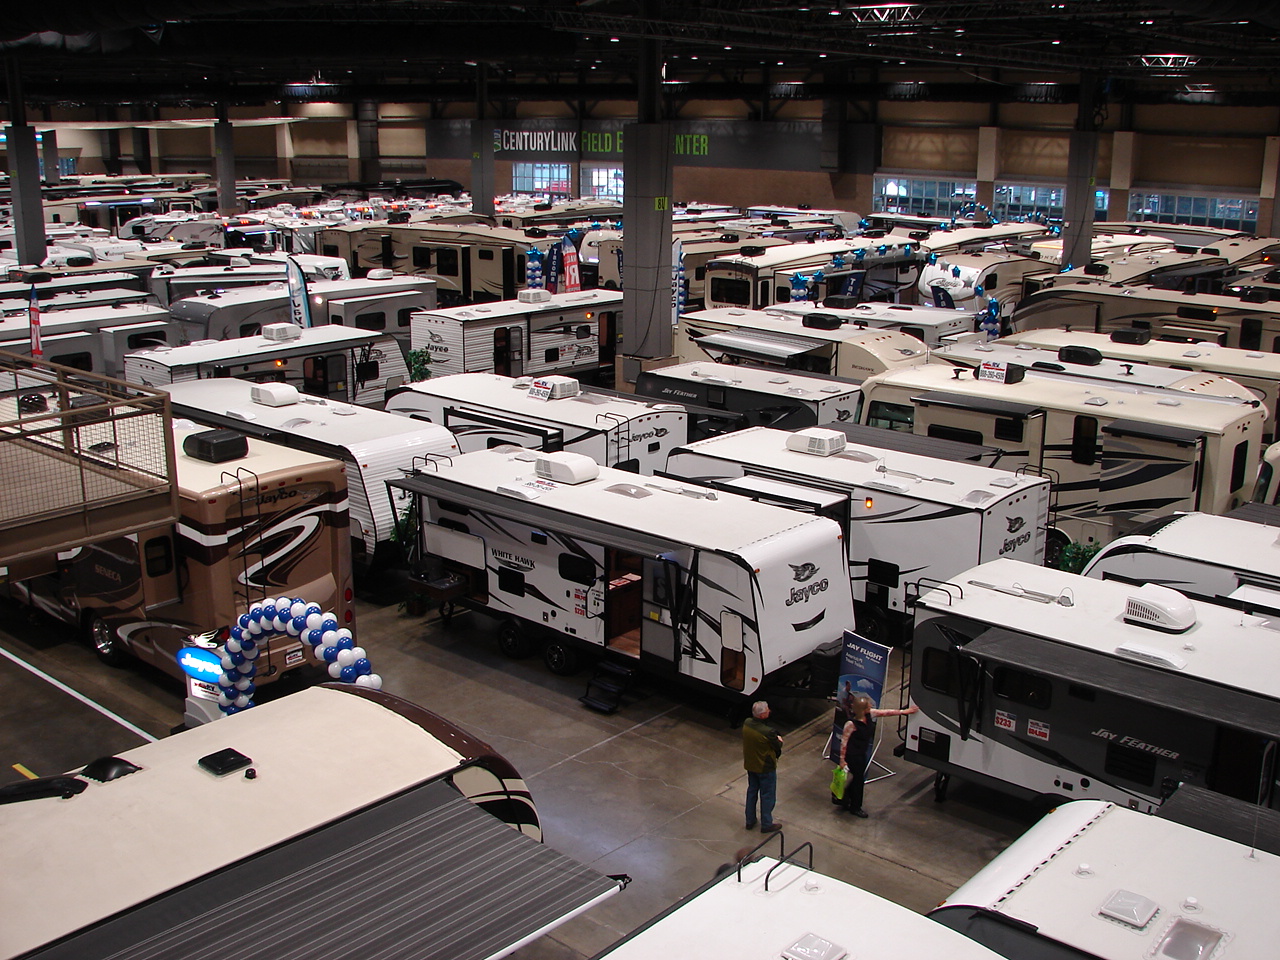 Attending RV Shows to Find the Perfect Travel Trailer